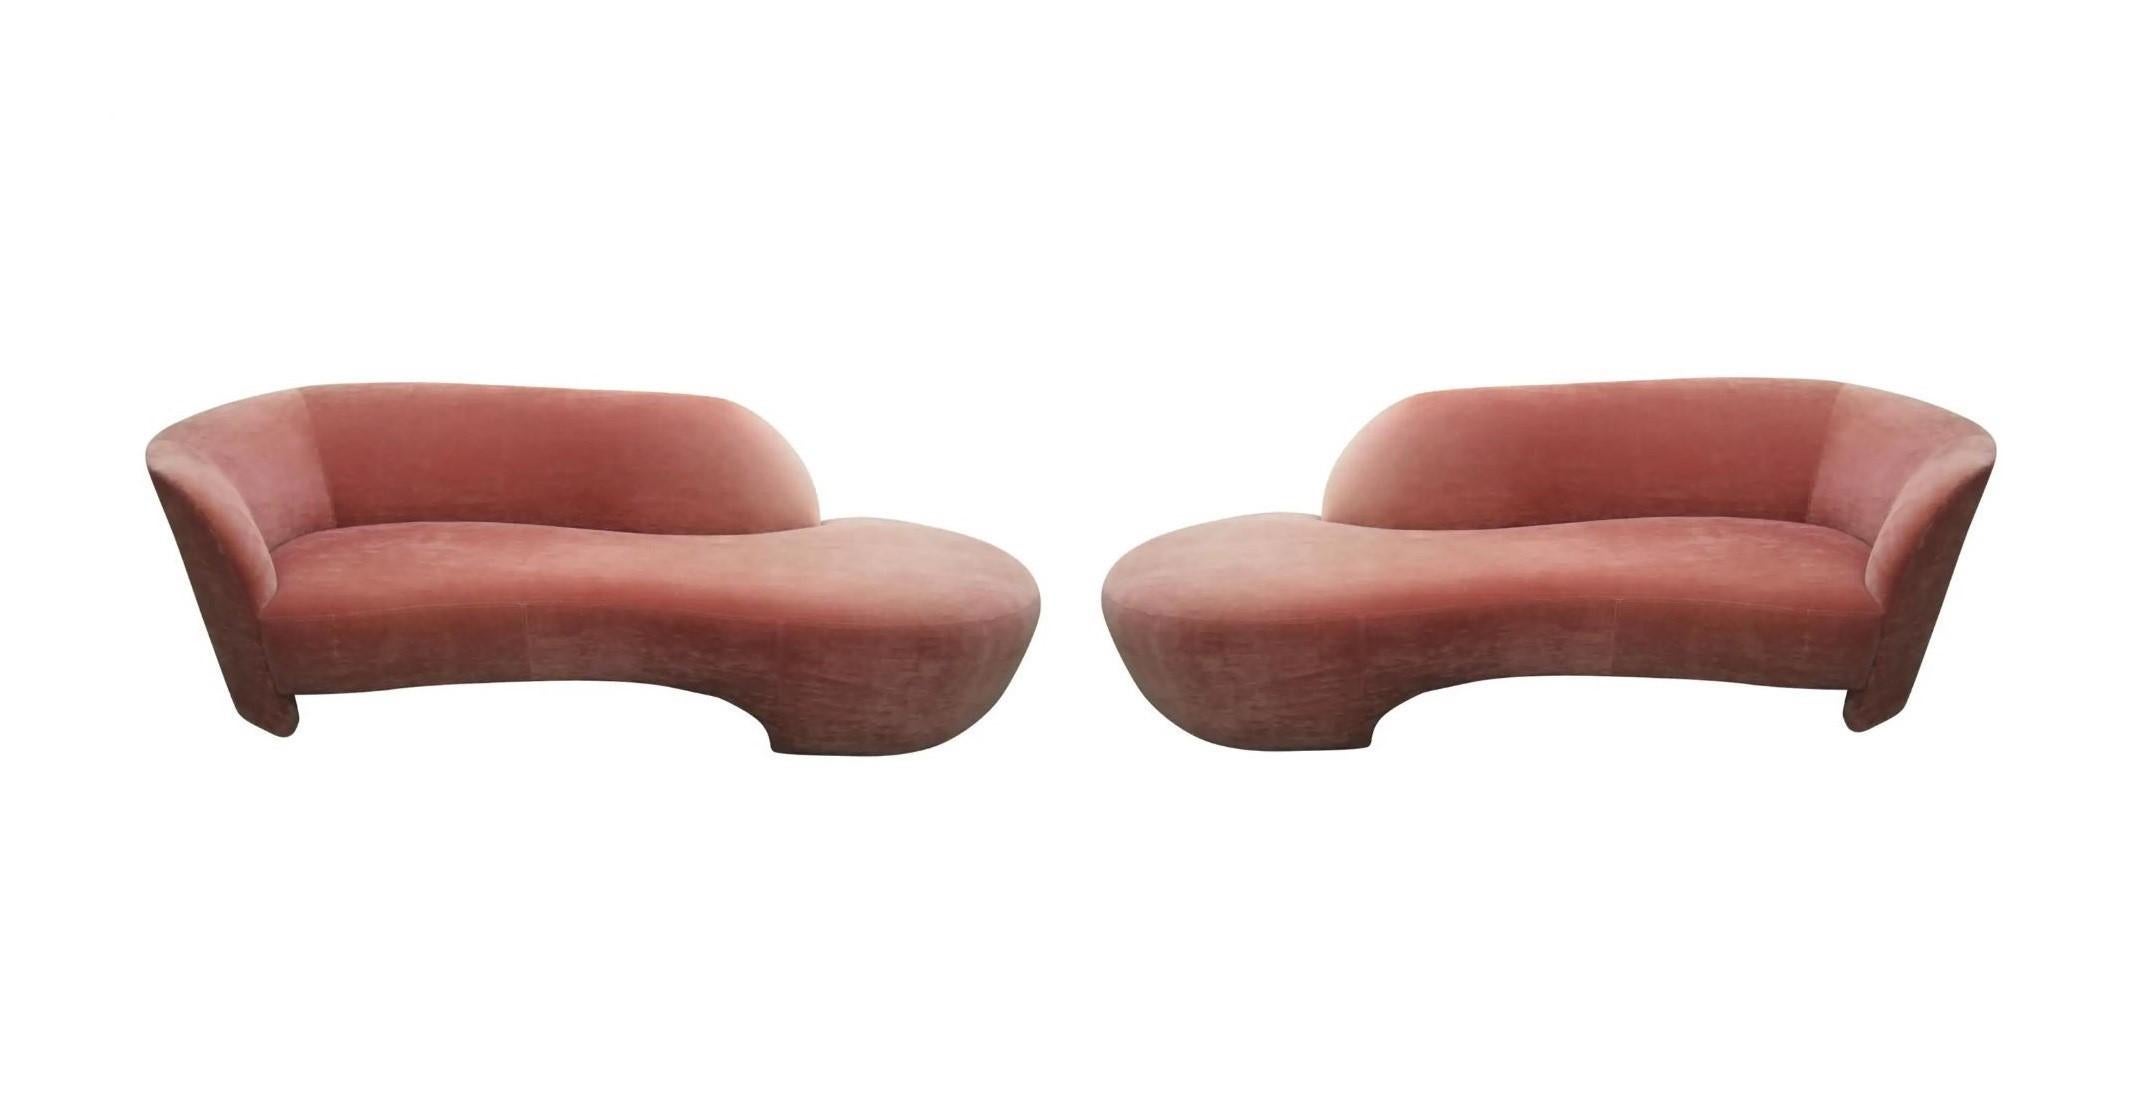 For your consideration are two serpentine cloud sofas designed by the legendary Vladimir Kagan. 1950s-era Serpentine sofa, perhaps the best known of all his creations inspired an entire genre of entertaining: Sexy with its curvaceous S-shape,